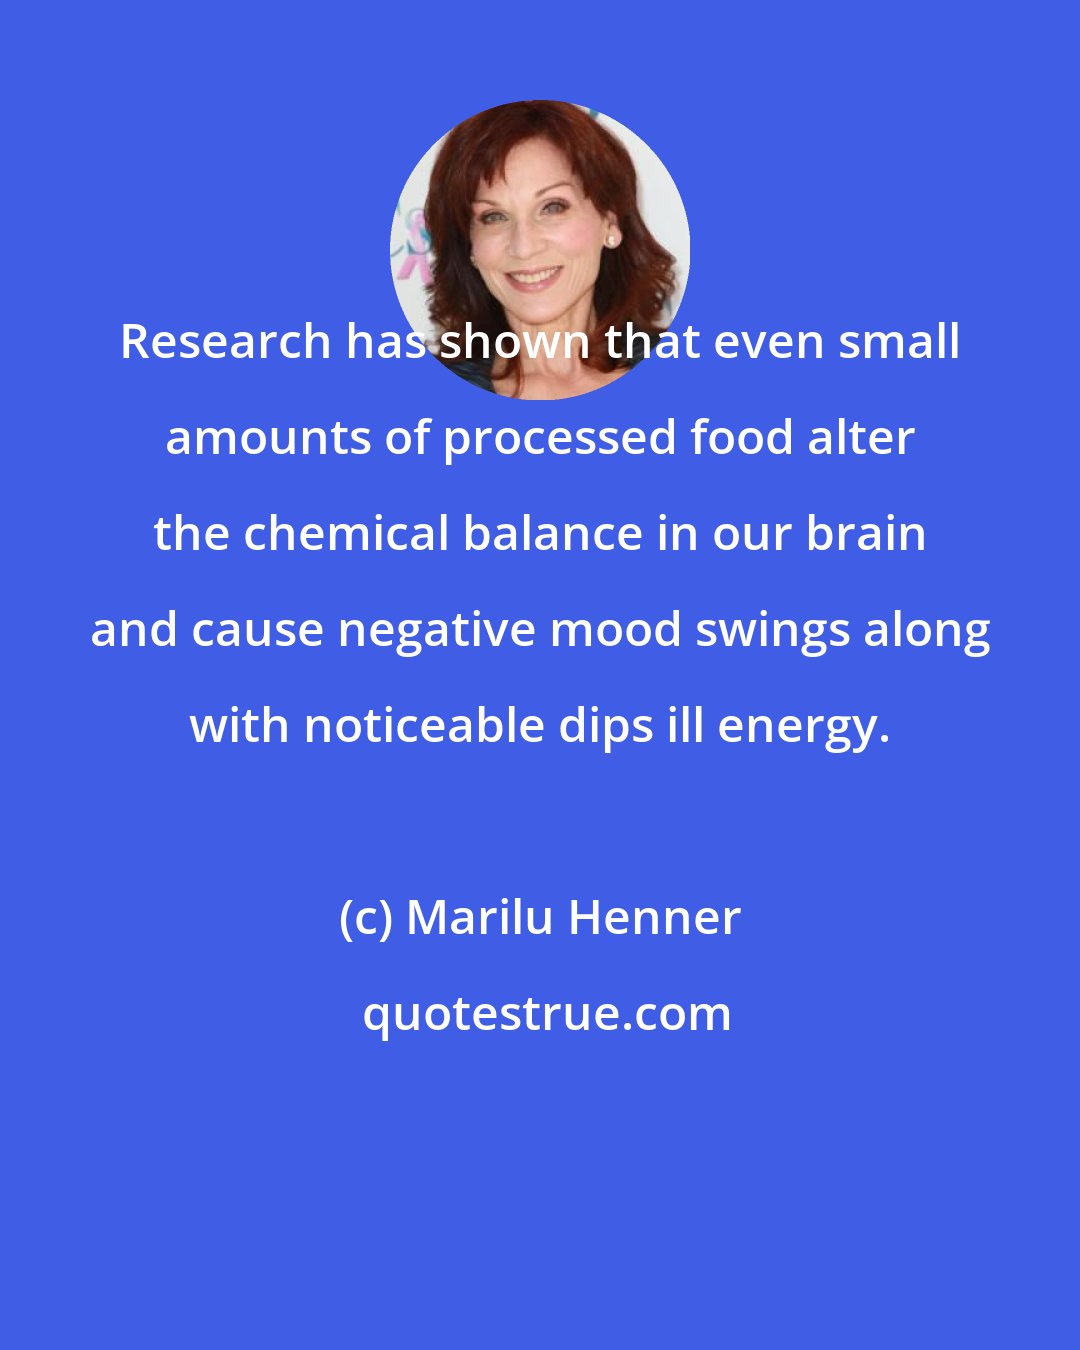 Marilu Henner: Research has shown that even small amounts of processed food alter the chemical balance in our brain and cause negative mood swings along with noticeable dips ill energy.